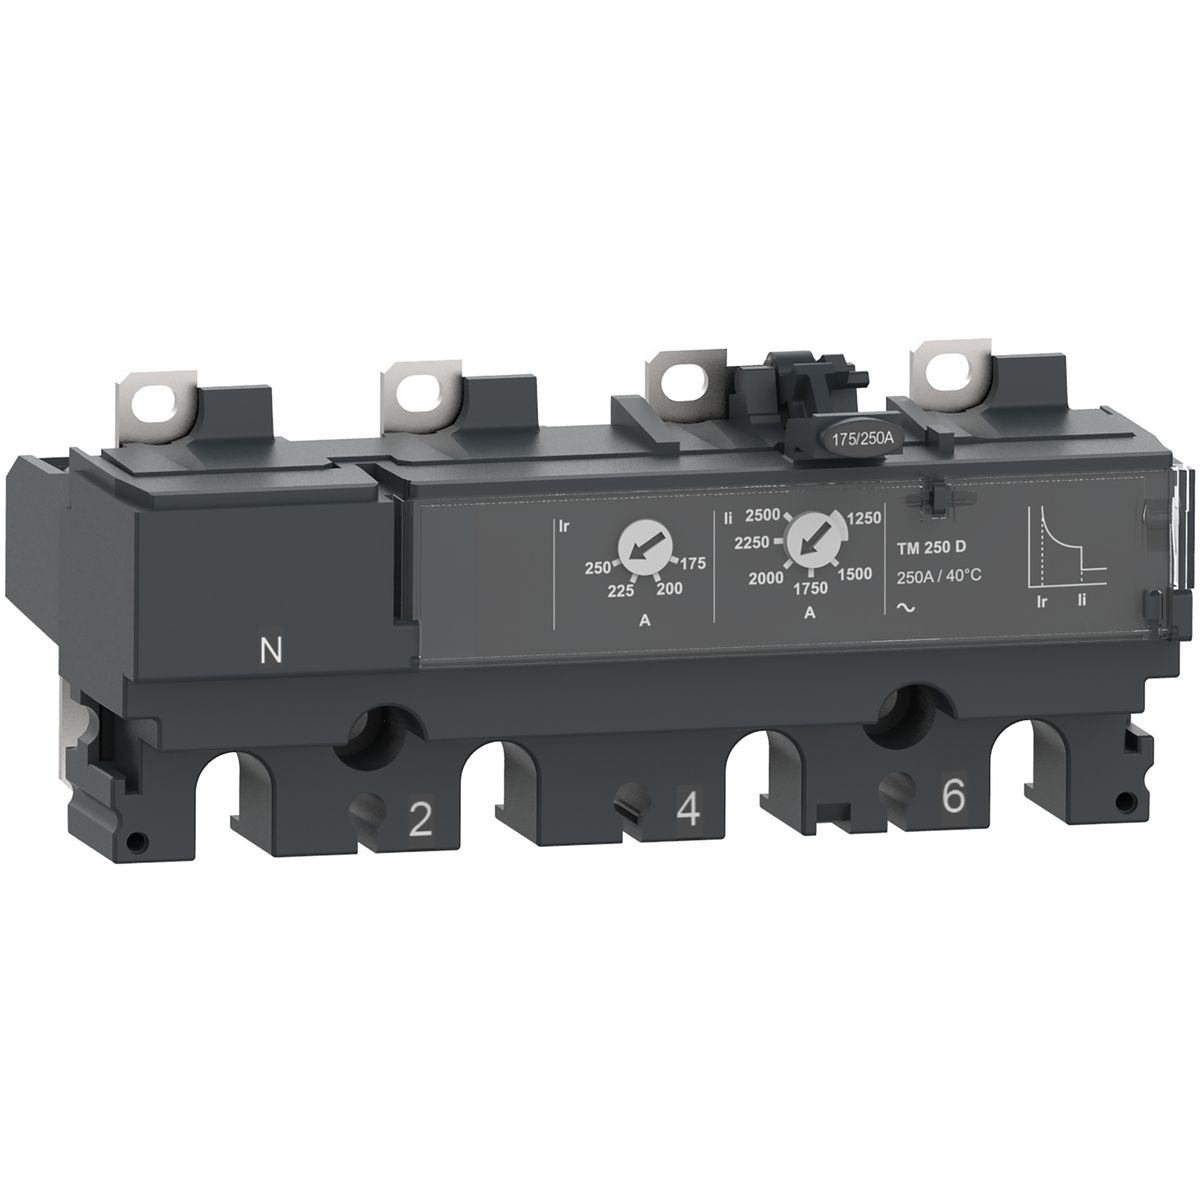 C164TM160 - Trip unit TM160D, ComPacT NSX160, 4 poles 4D (neutral fully protected), thermal magnetic protections, 160A rating - Schneider Electric - 0